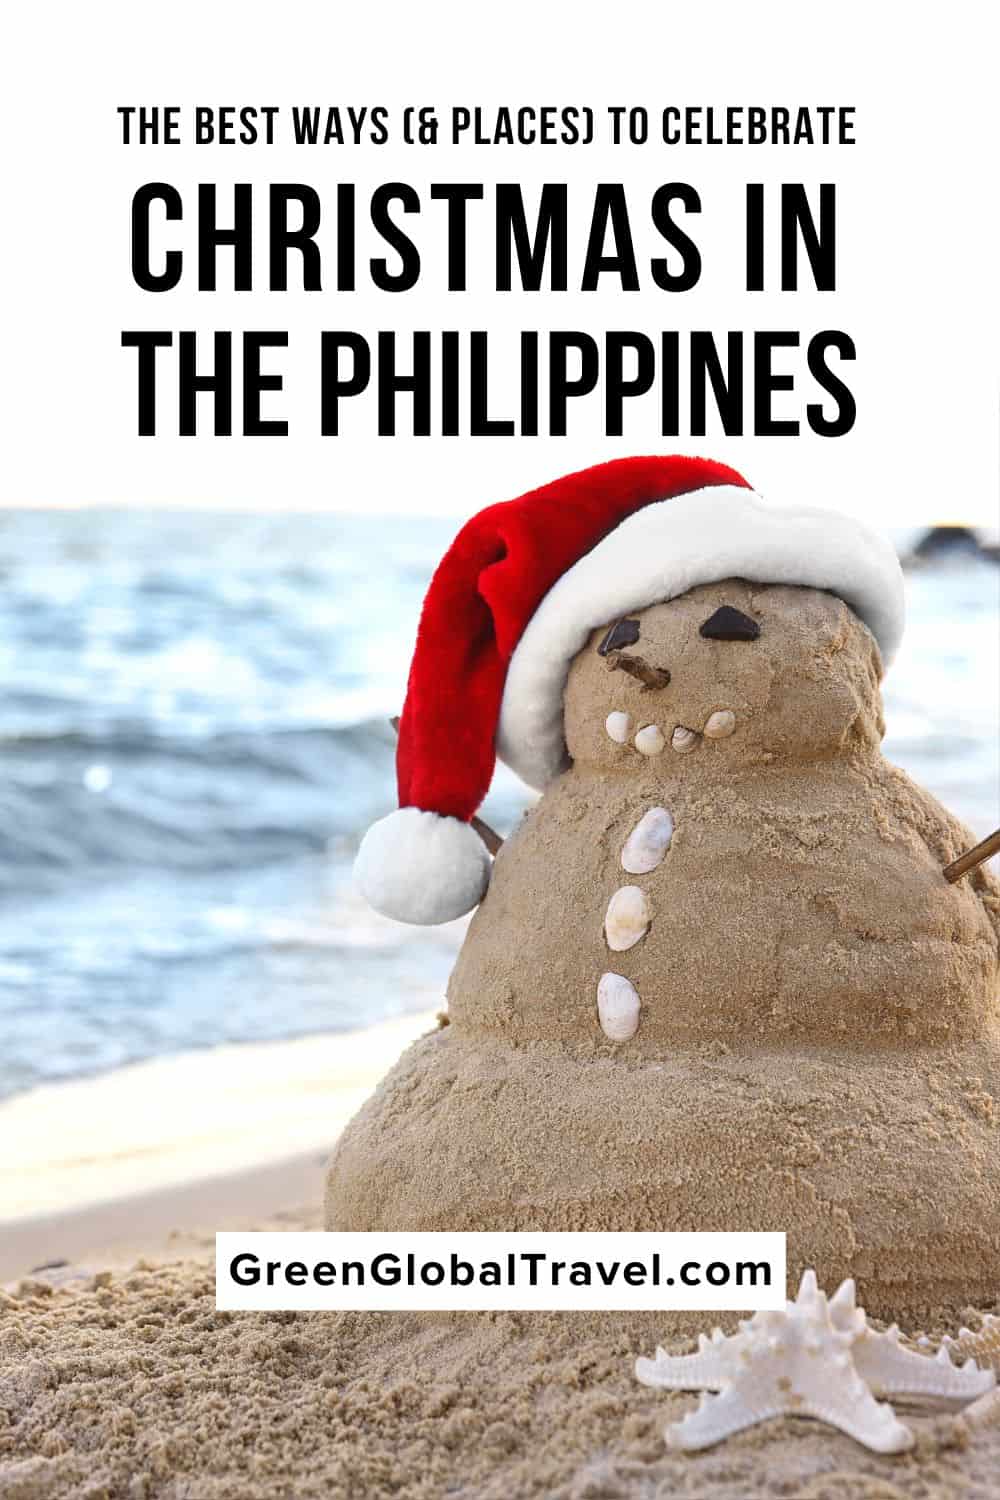 Kris Kringle Ideas: 10 Funny and Useful 'Somethings' - When In Manila